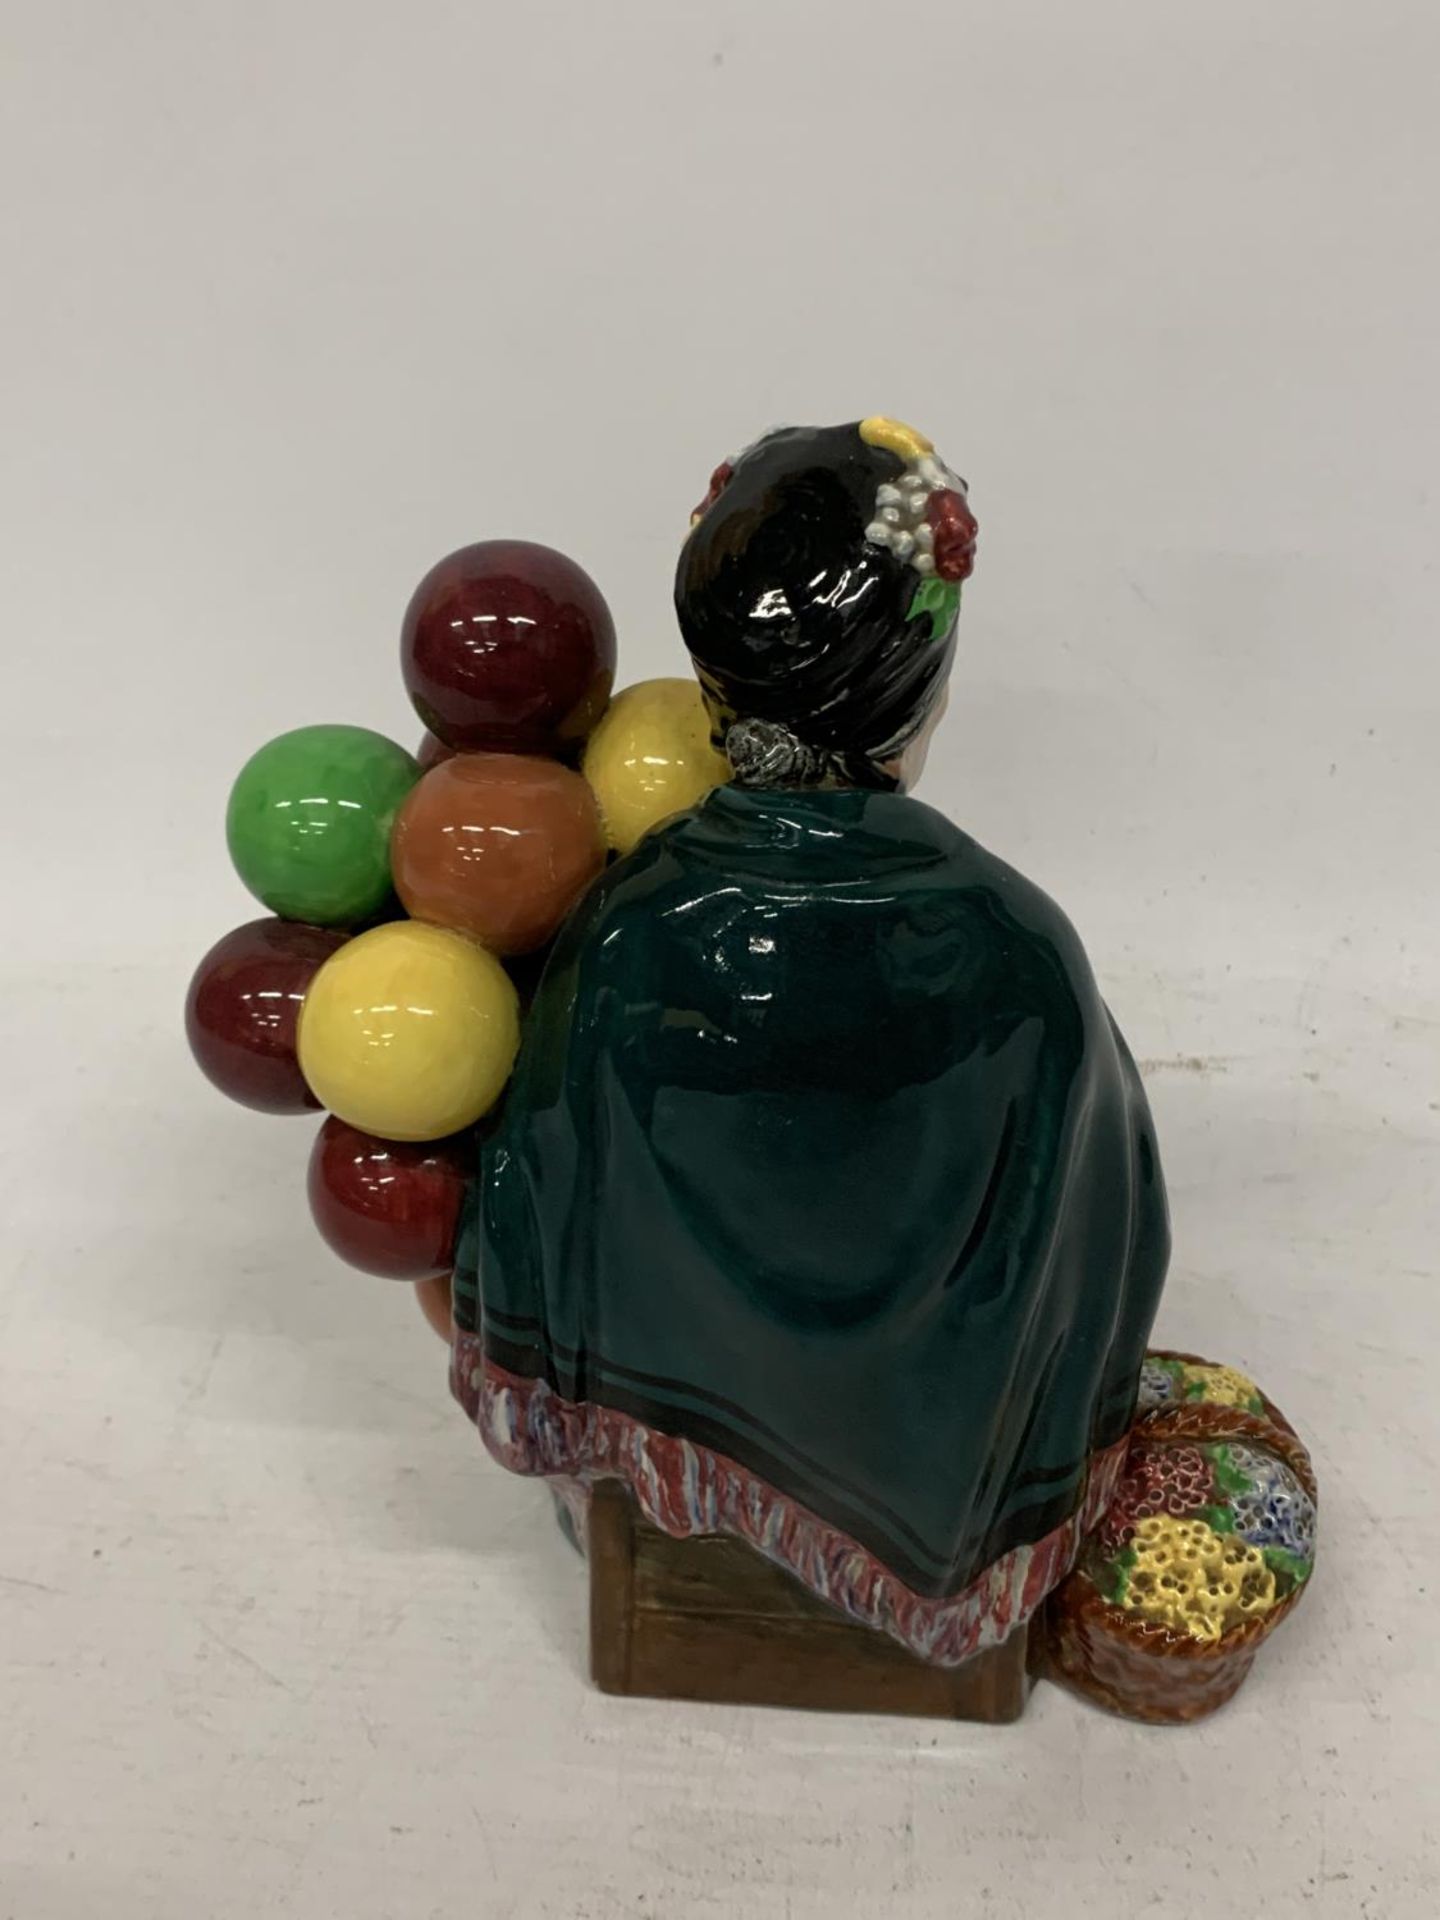 A ROYAL DOULTON FIGURE OF "THE OLD BALLOON SELLER" HN 1315 - Image 2 of 3